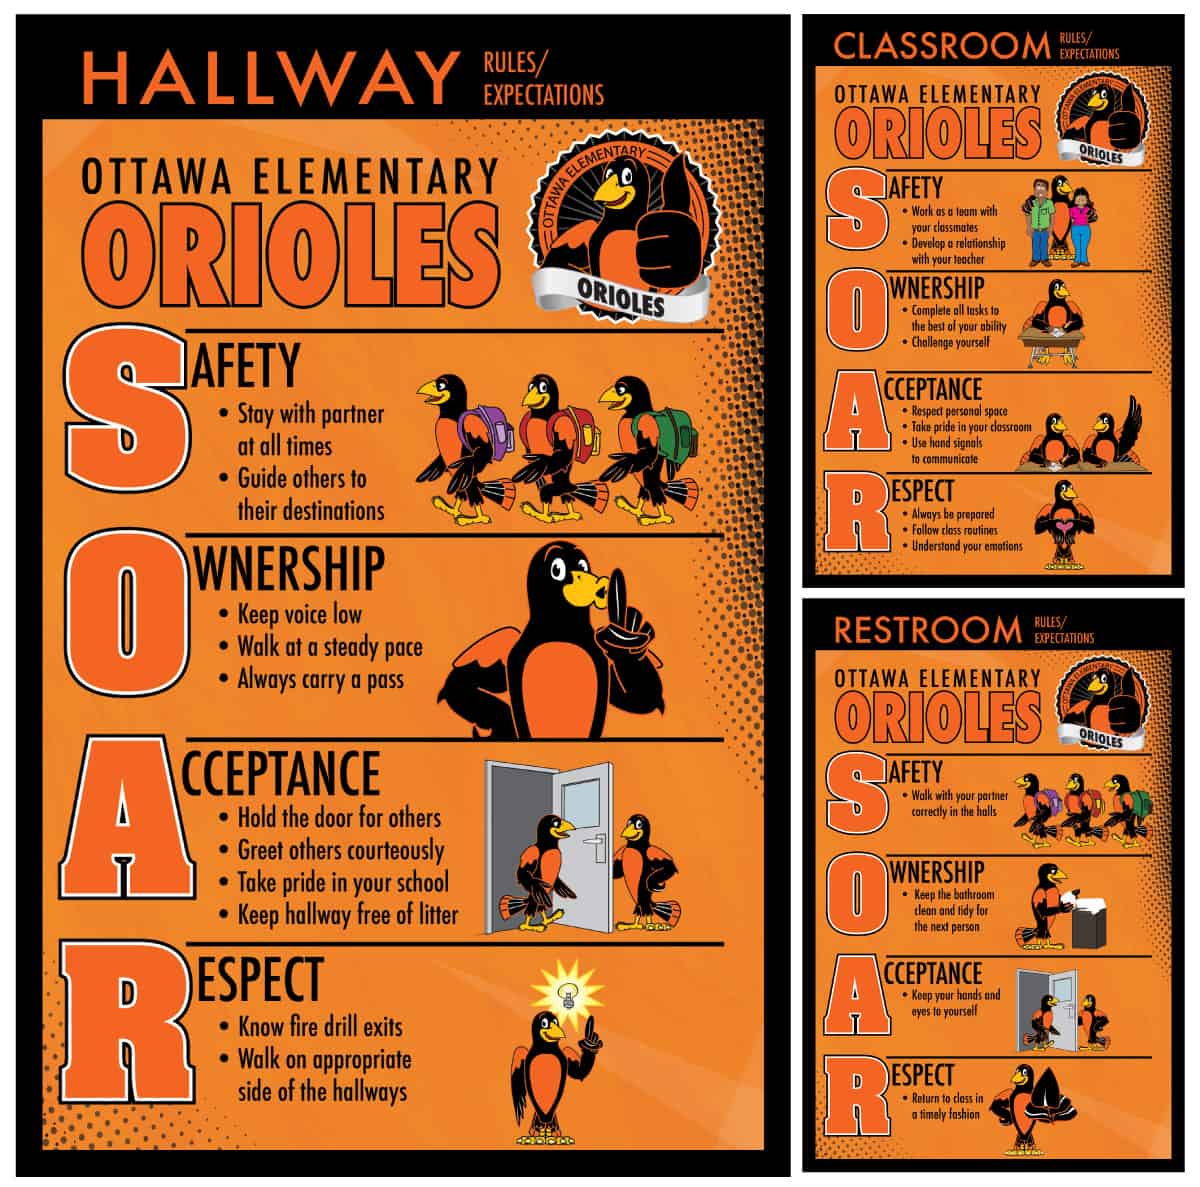 Rules-posters_Oriole